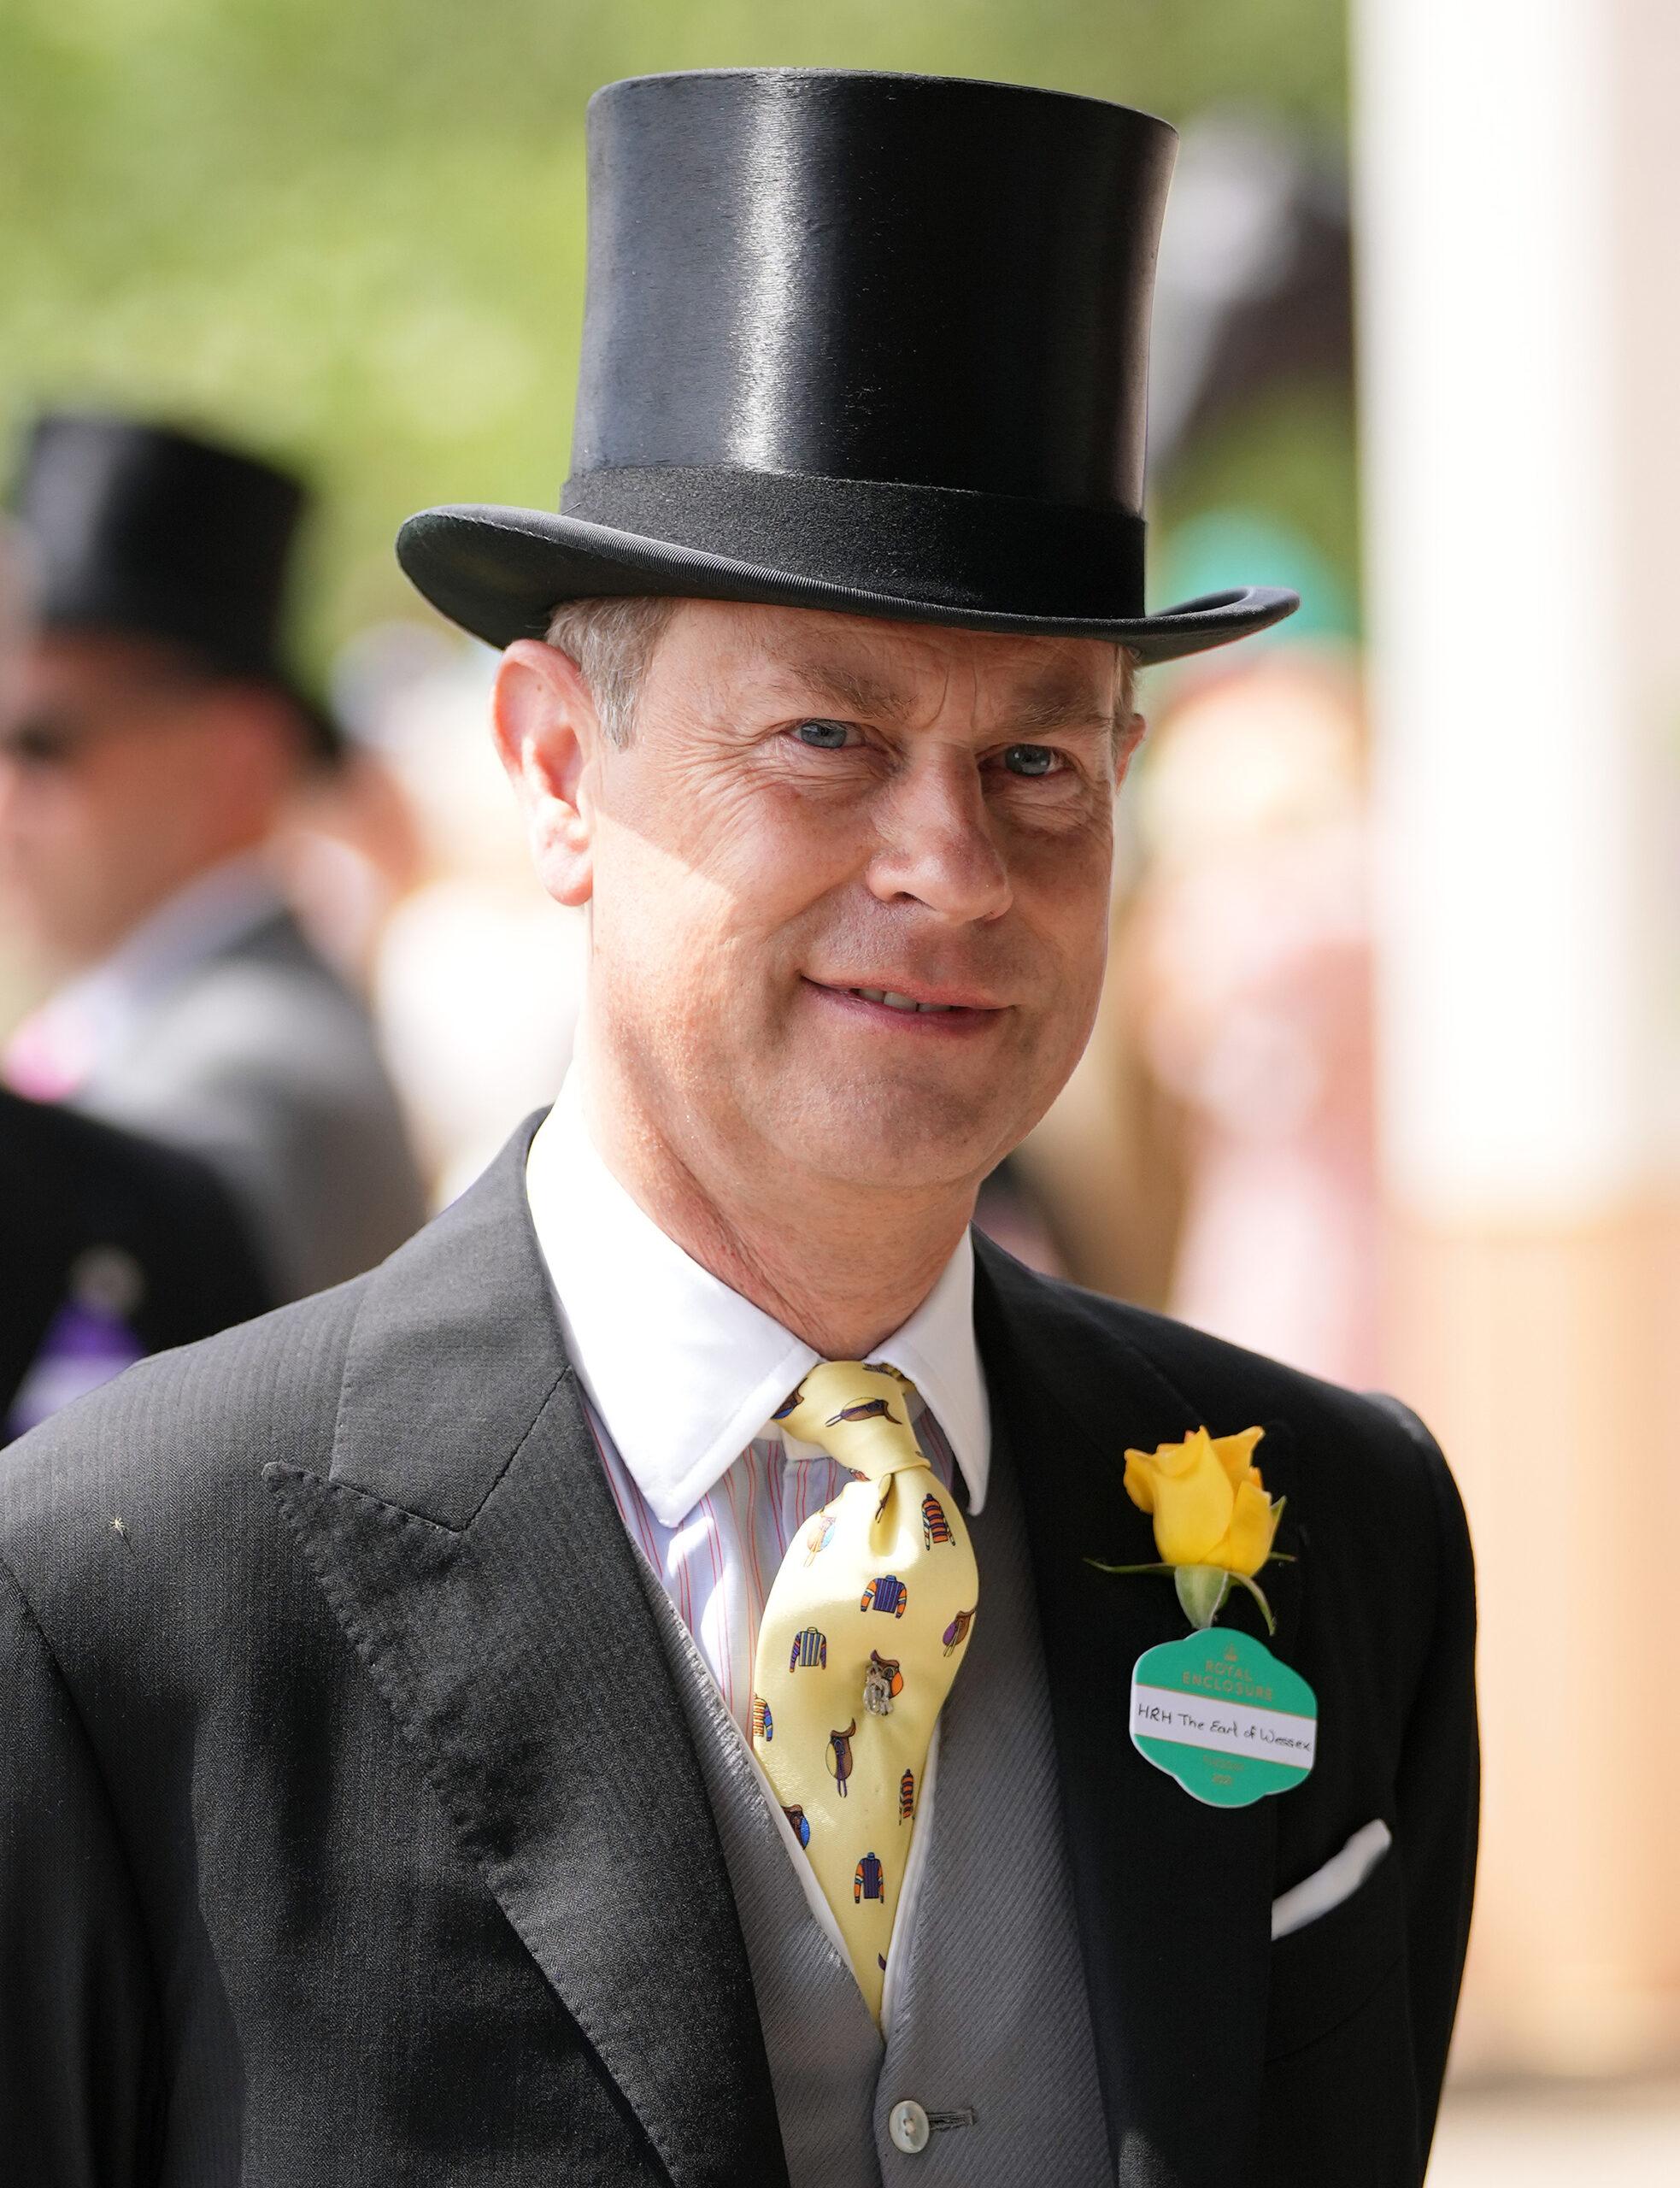 Day one of Royal Ascot 2021